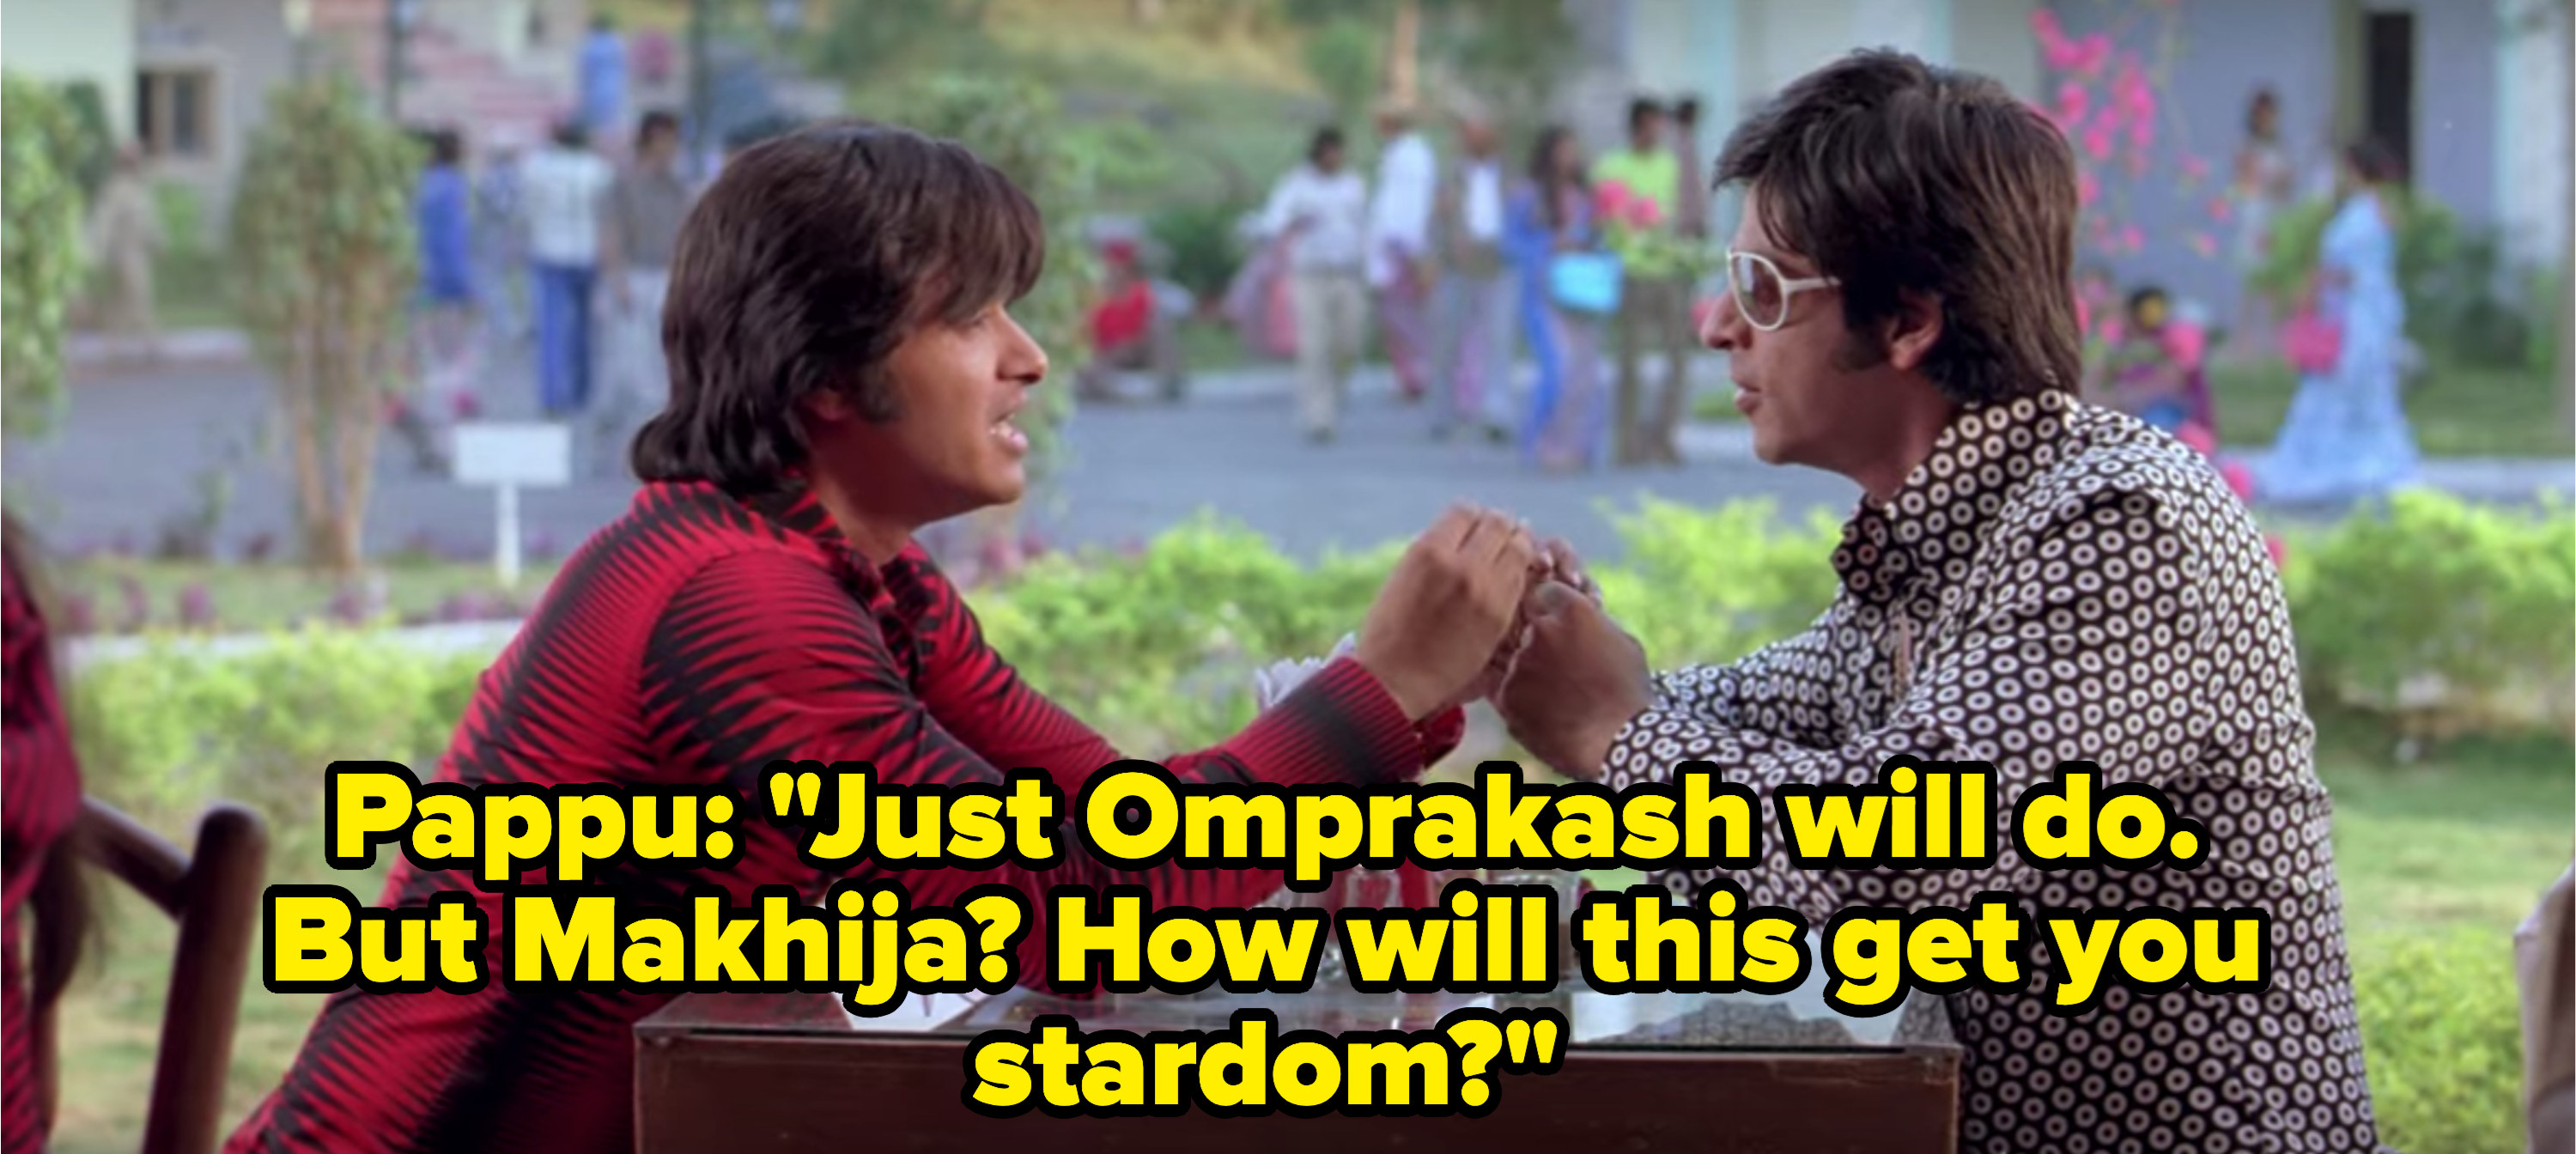 Om and Pappu sit together at a small cafe table.